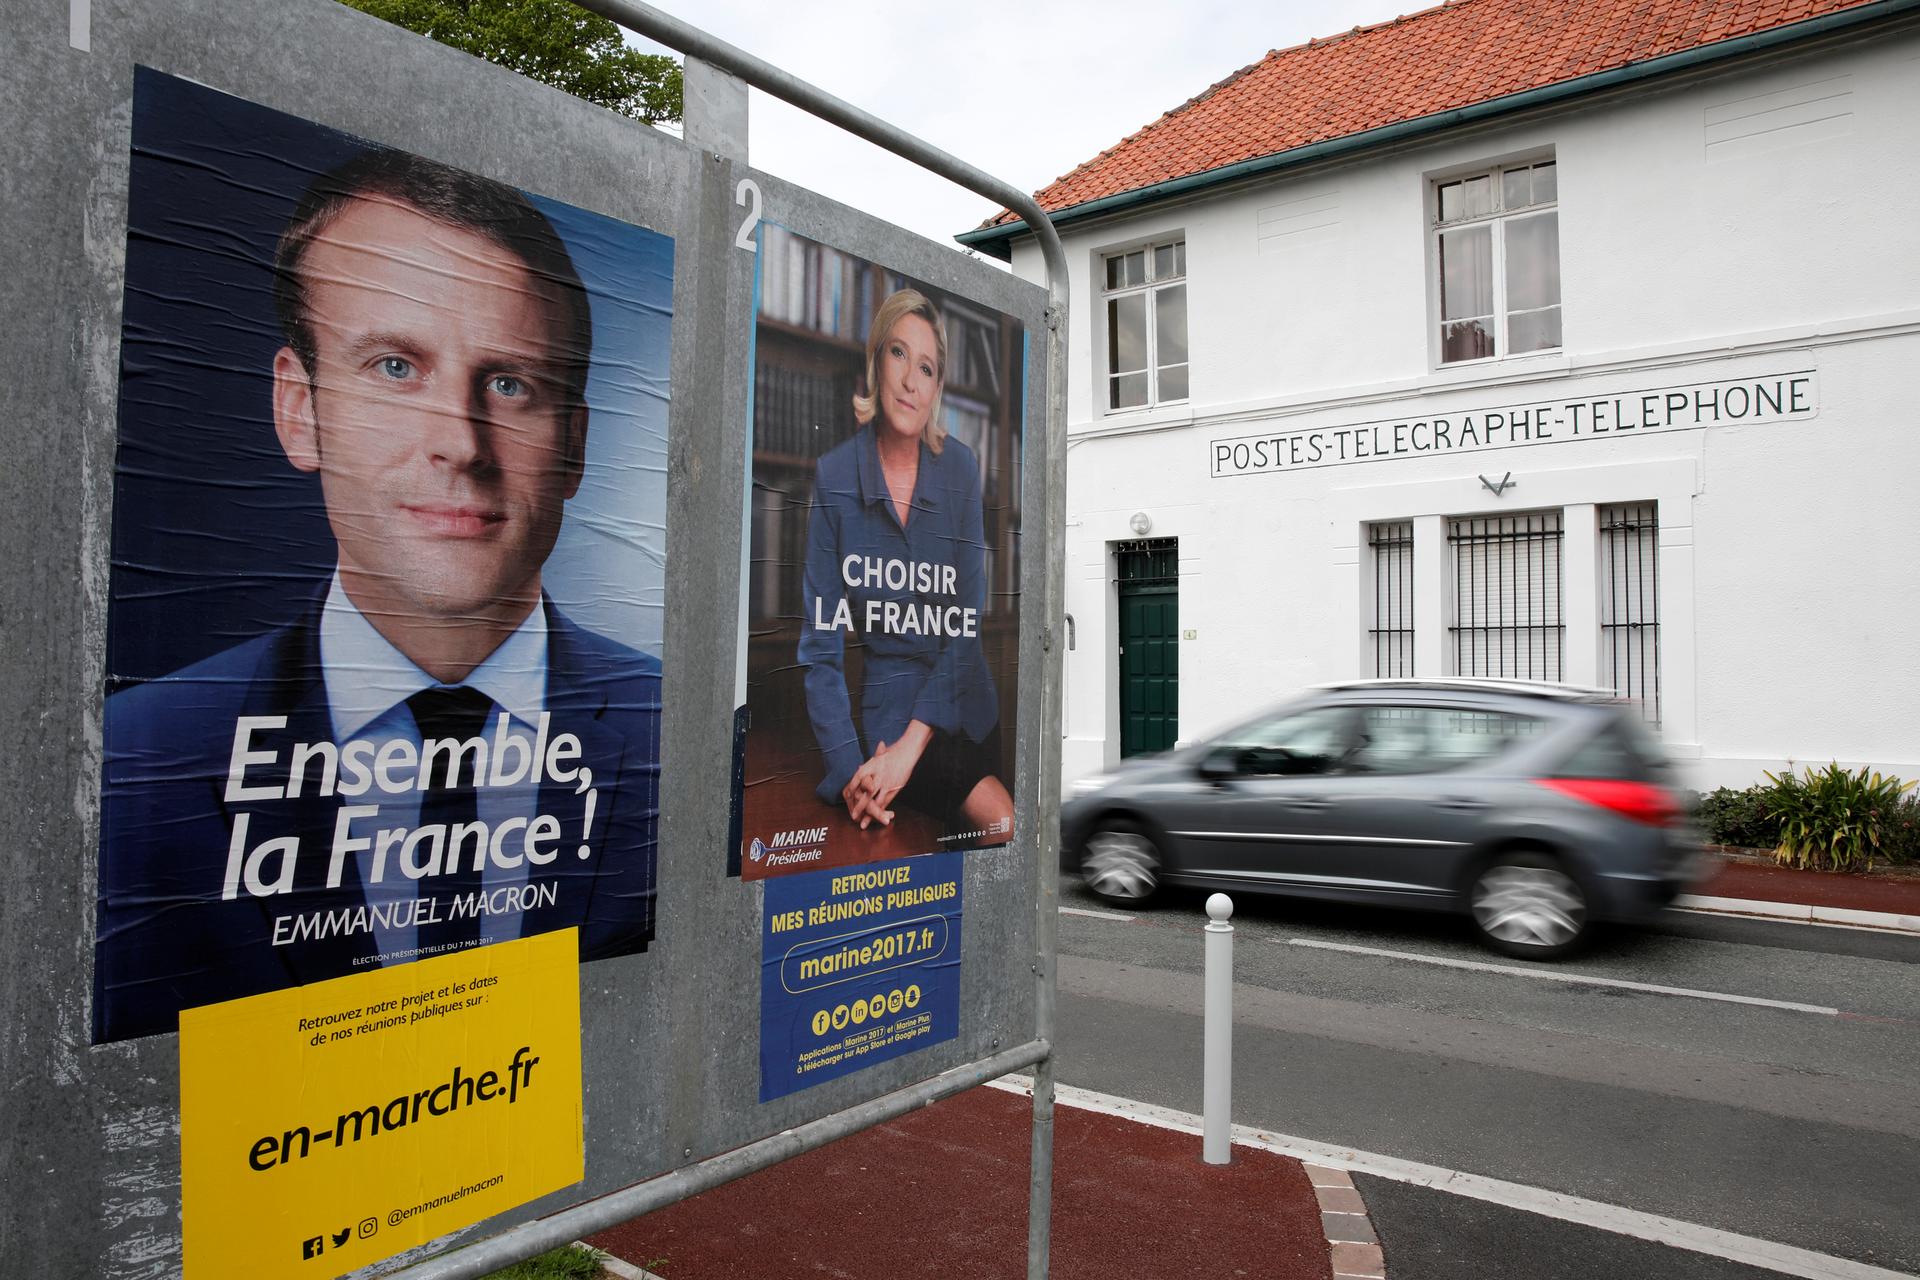 Official posters of the candidates for the 2017 French presidential election, Emmanuel Macron, left, head of the political movement En Marche!, or Onwards!, and Marine Le Pen, of French National Front (FN).